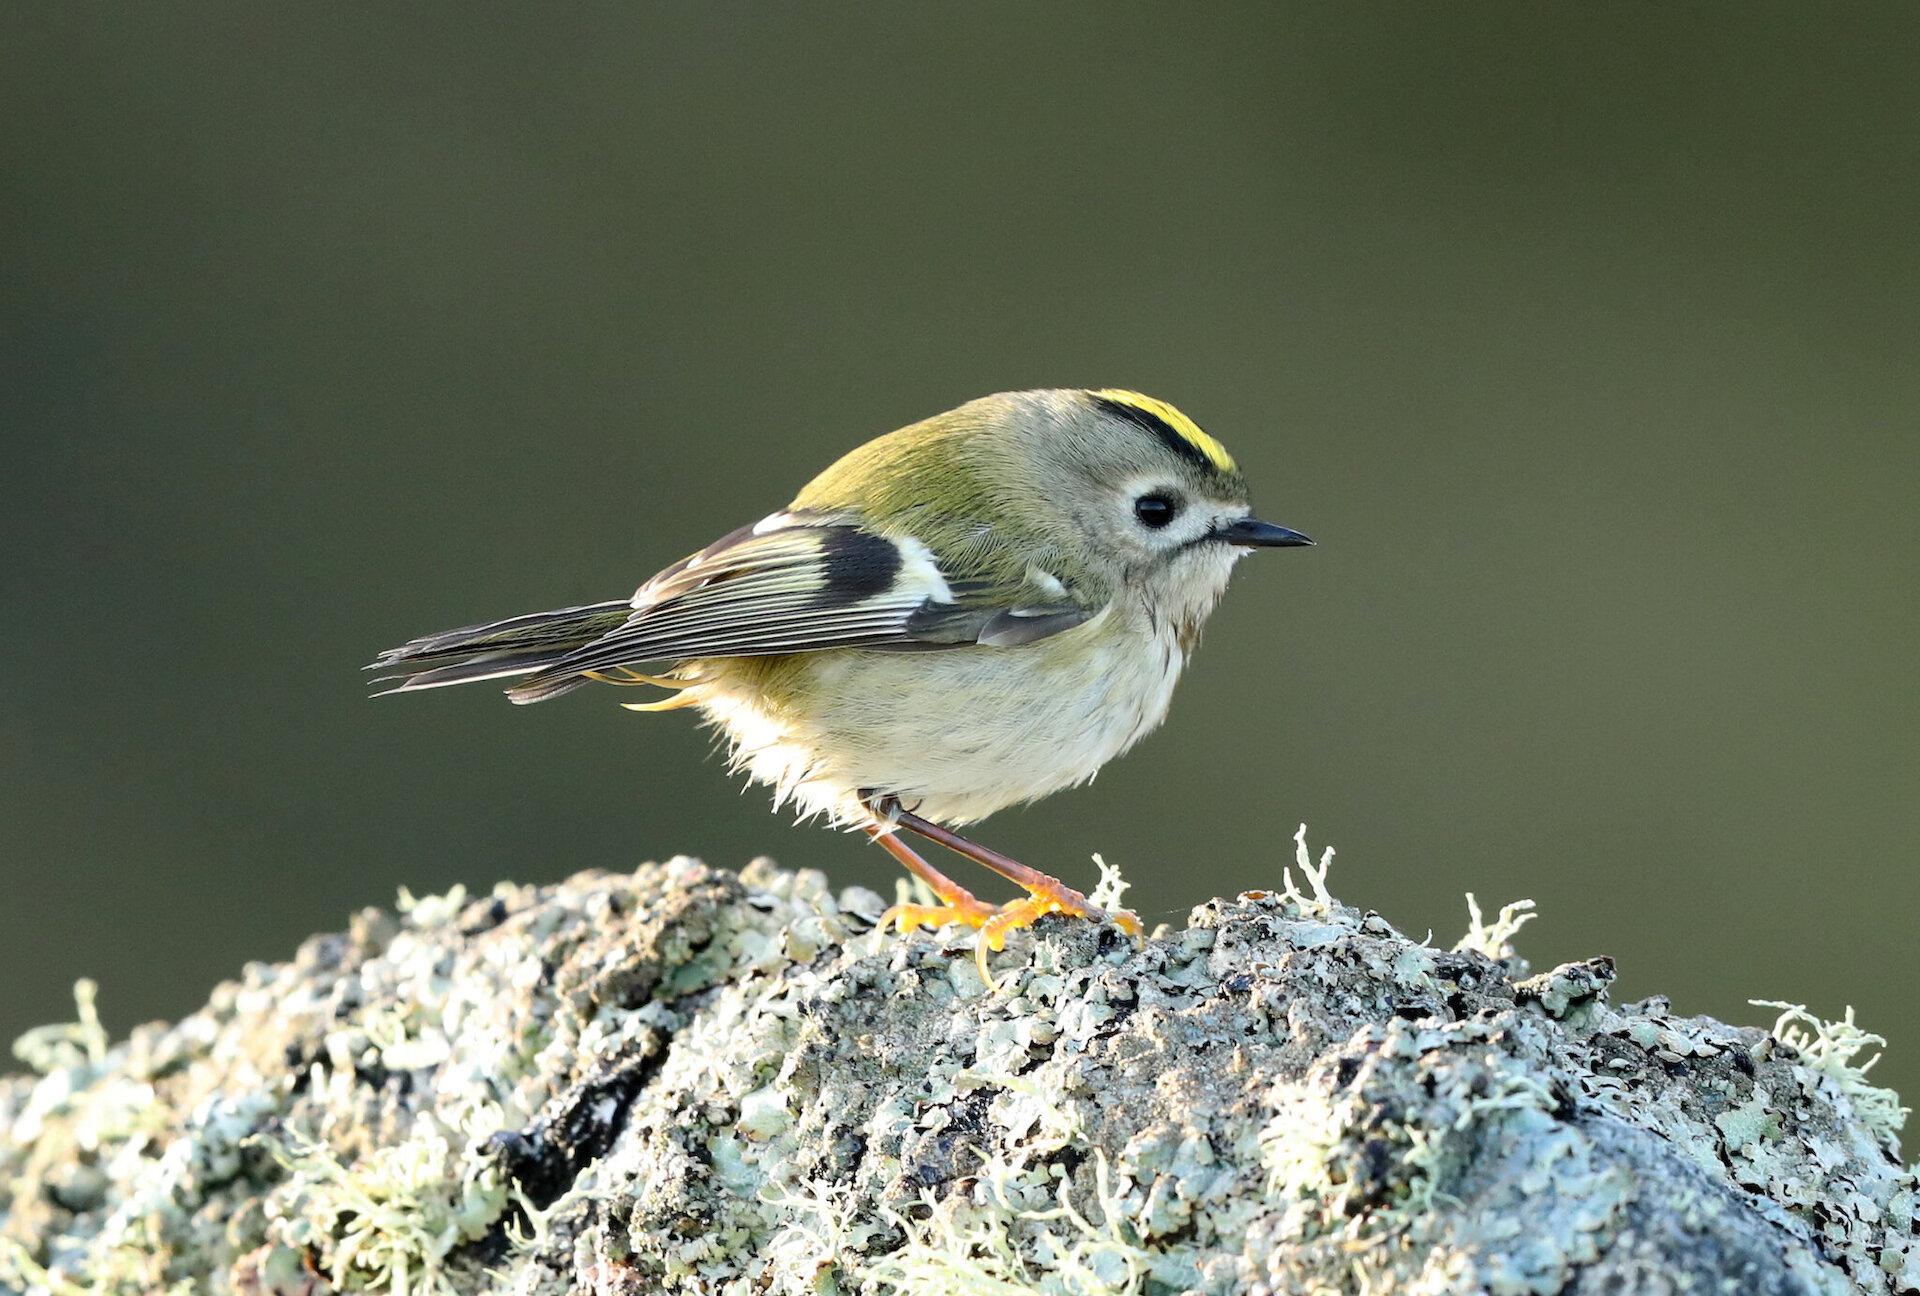 Goldcrests are often seen in Shetland during the autumn migration.